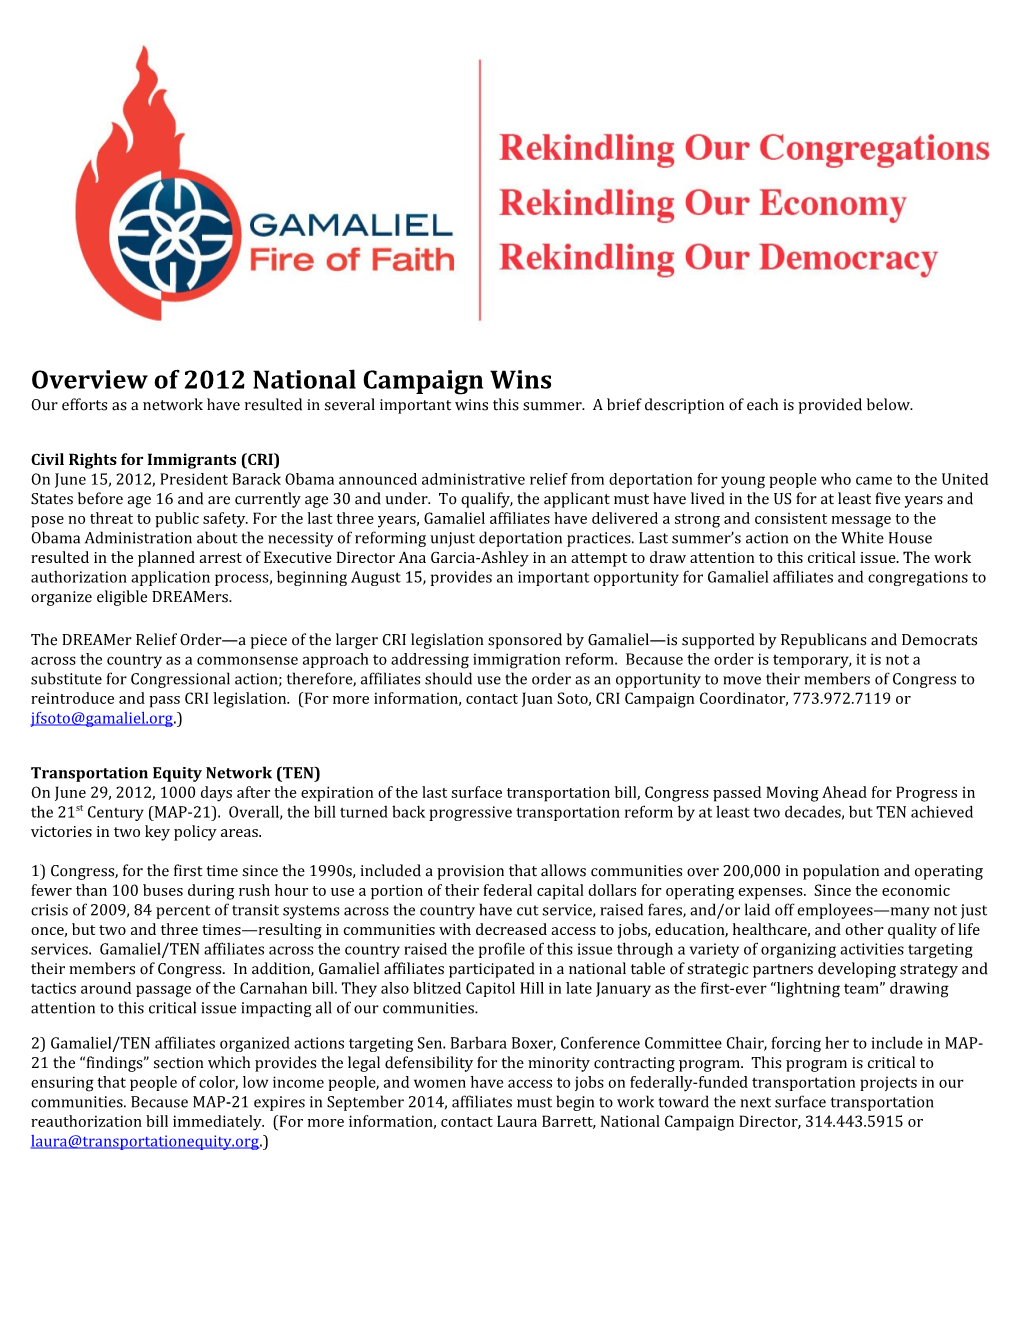 Overview of 2012 National Campaign Wins